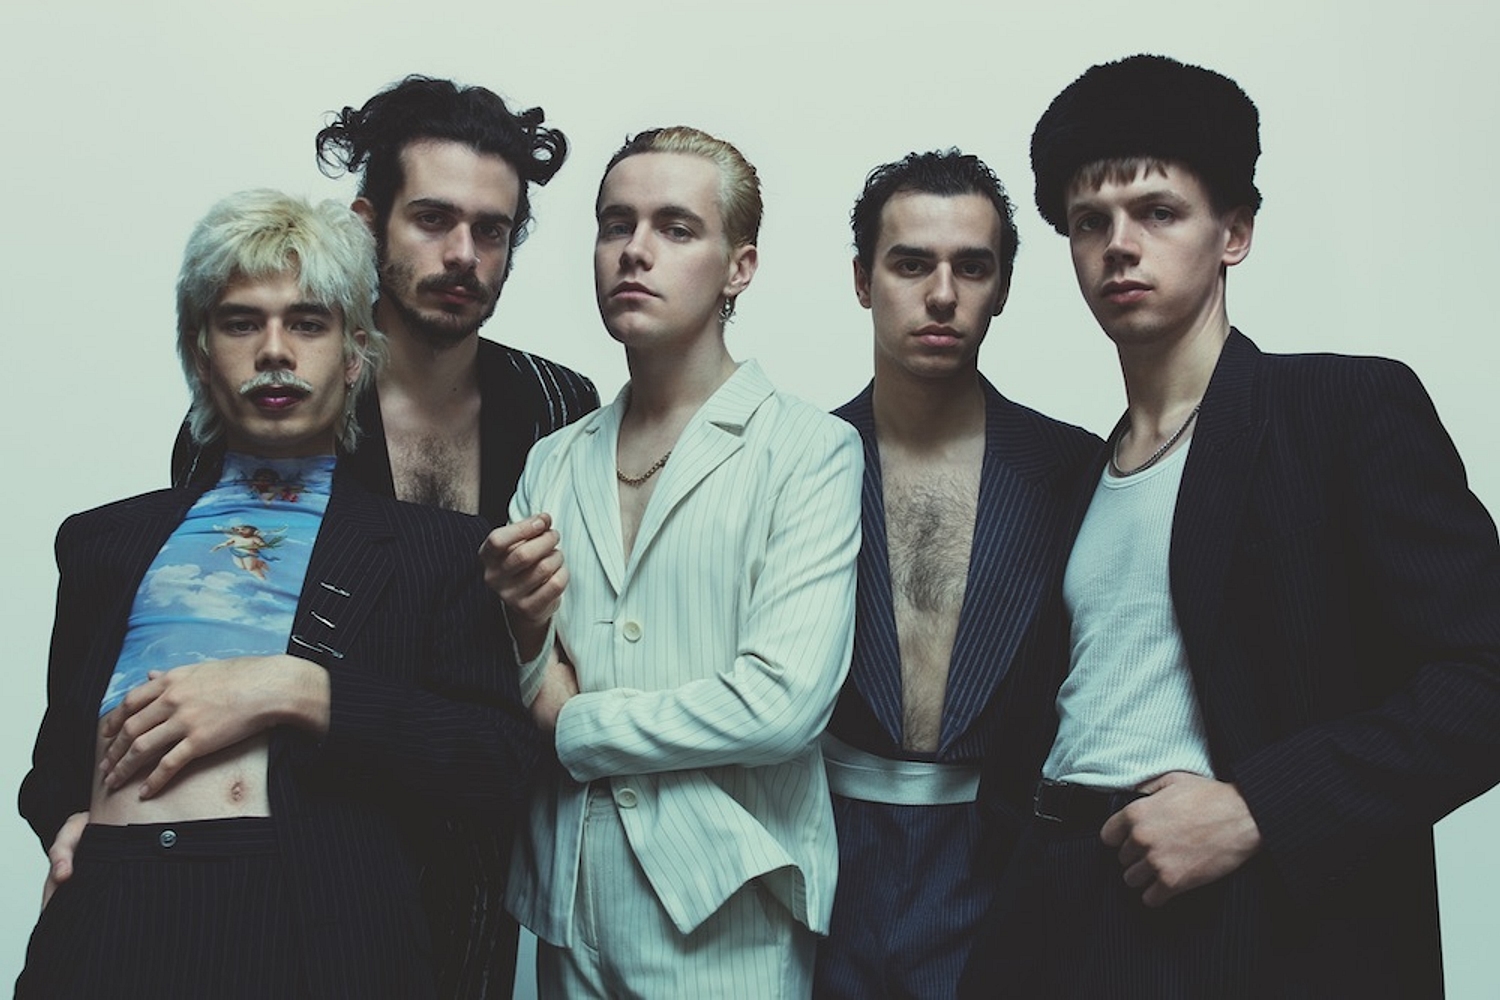 HMLTD release ‘Mikey’s Song’ video